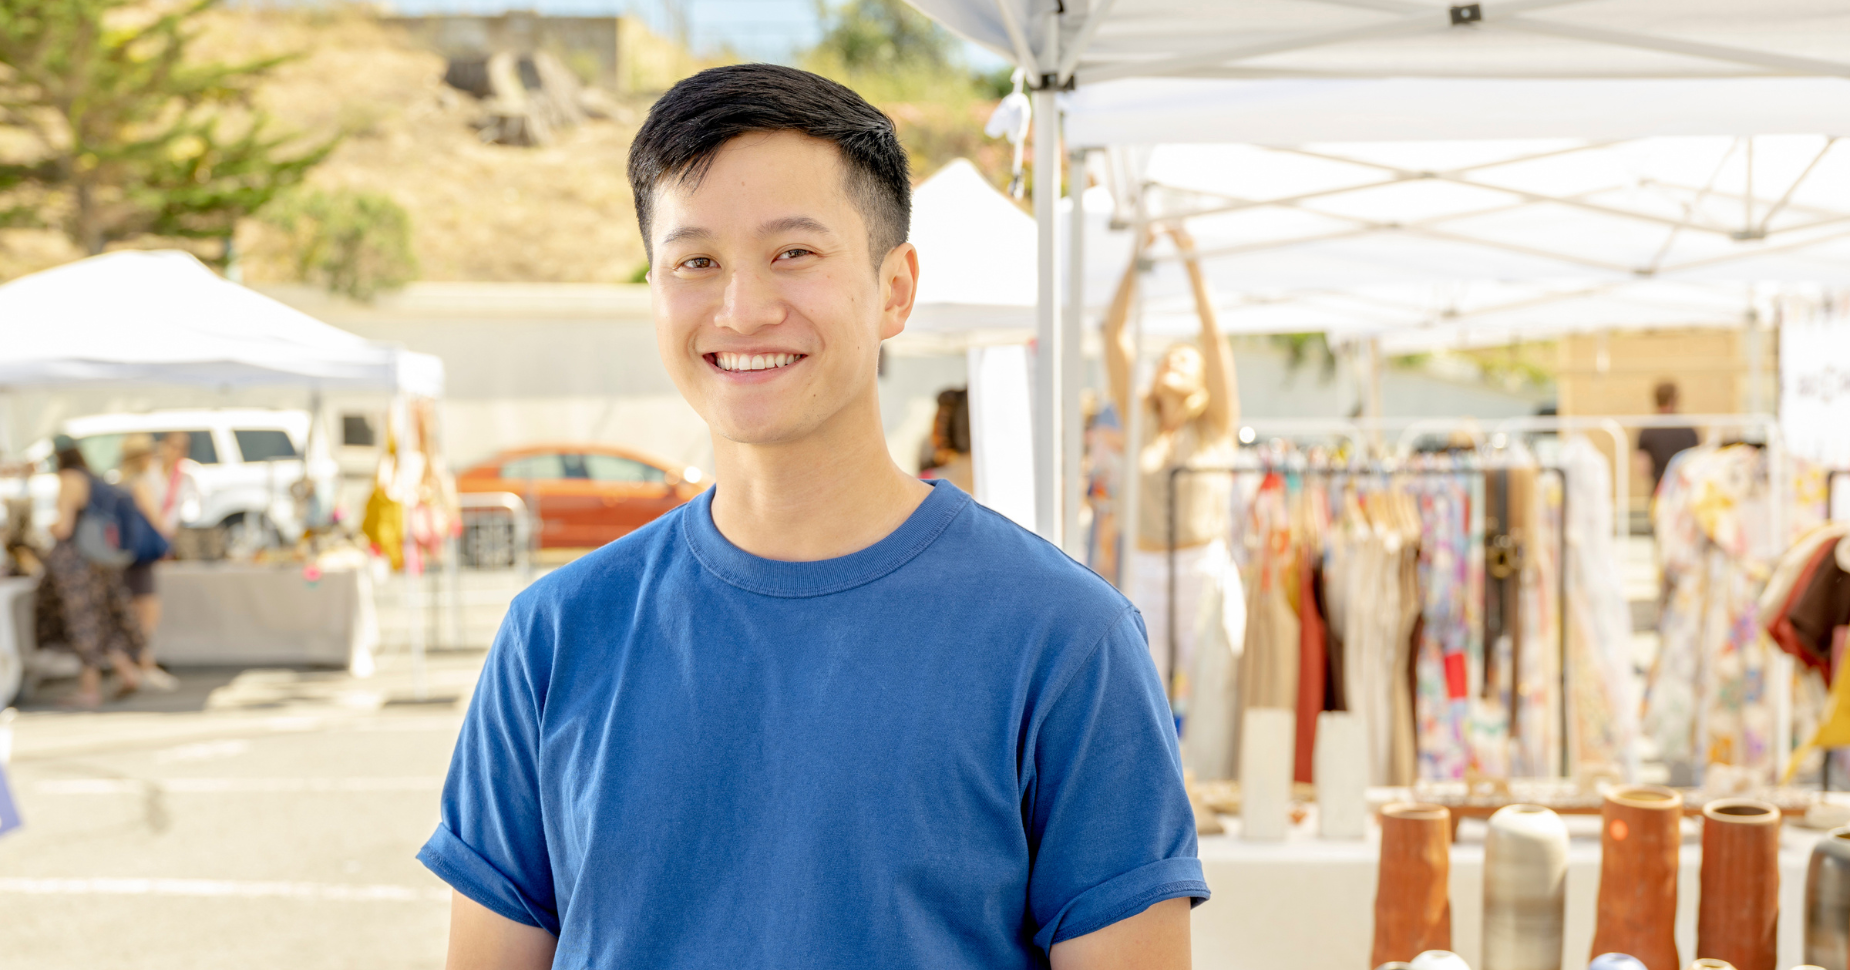 Daniel Vu Takes his Ceramics Brand to New Heights Selling In-Person with Shopify POS